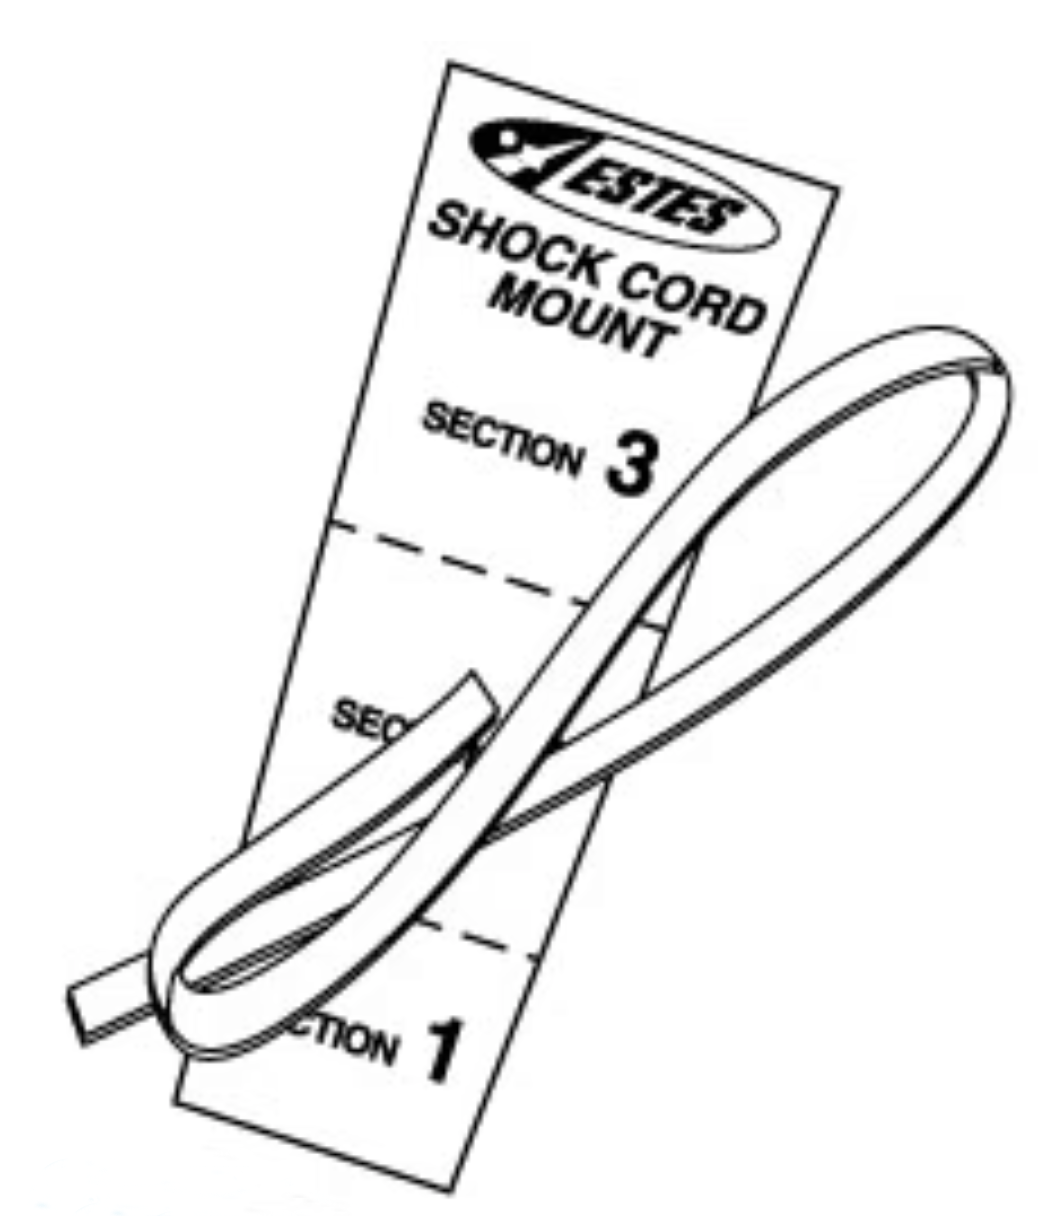 Shock Cords & Mount Pack - 002278